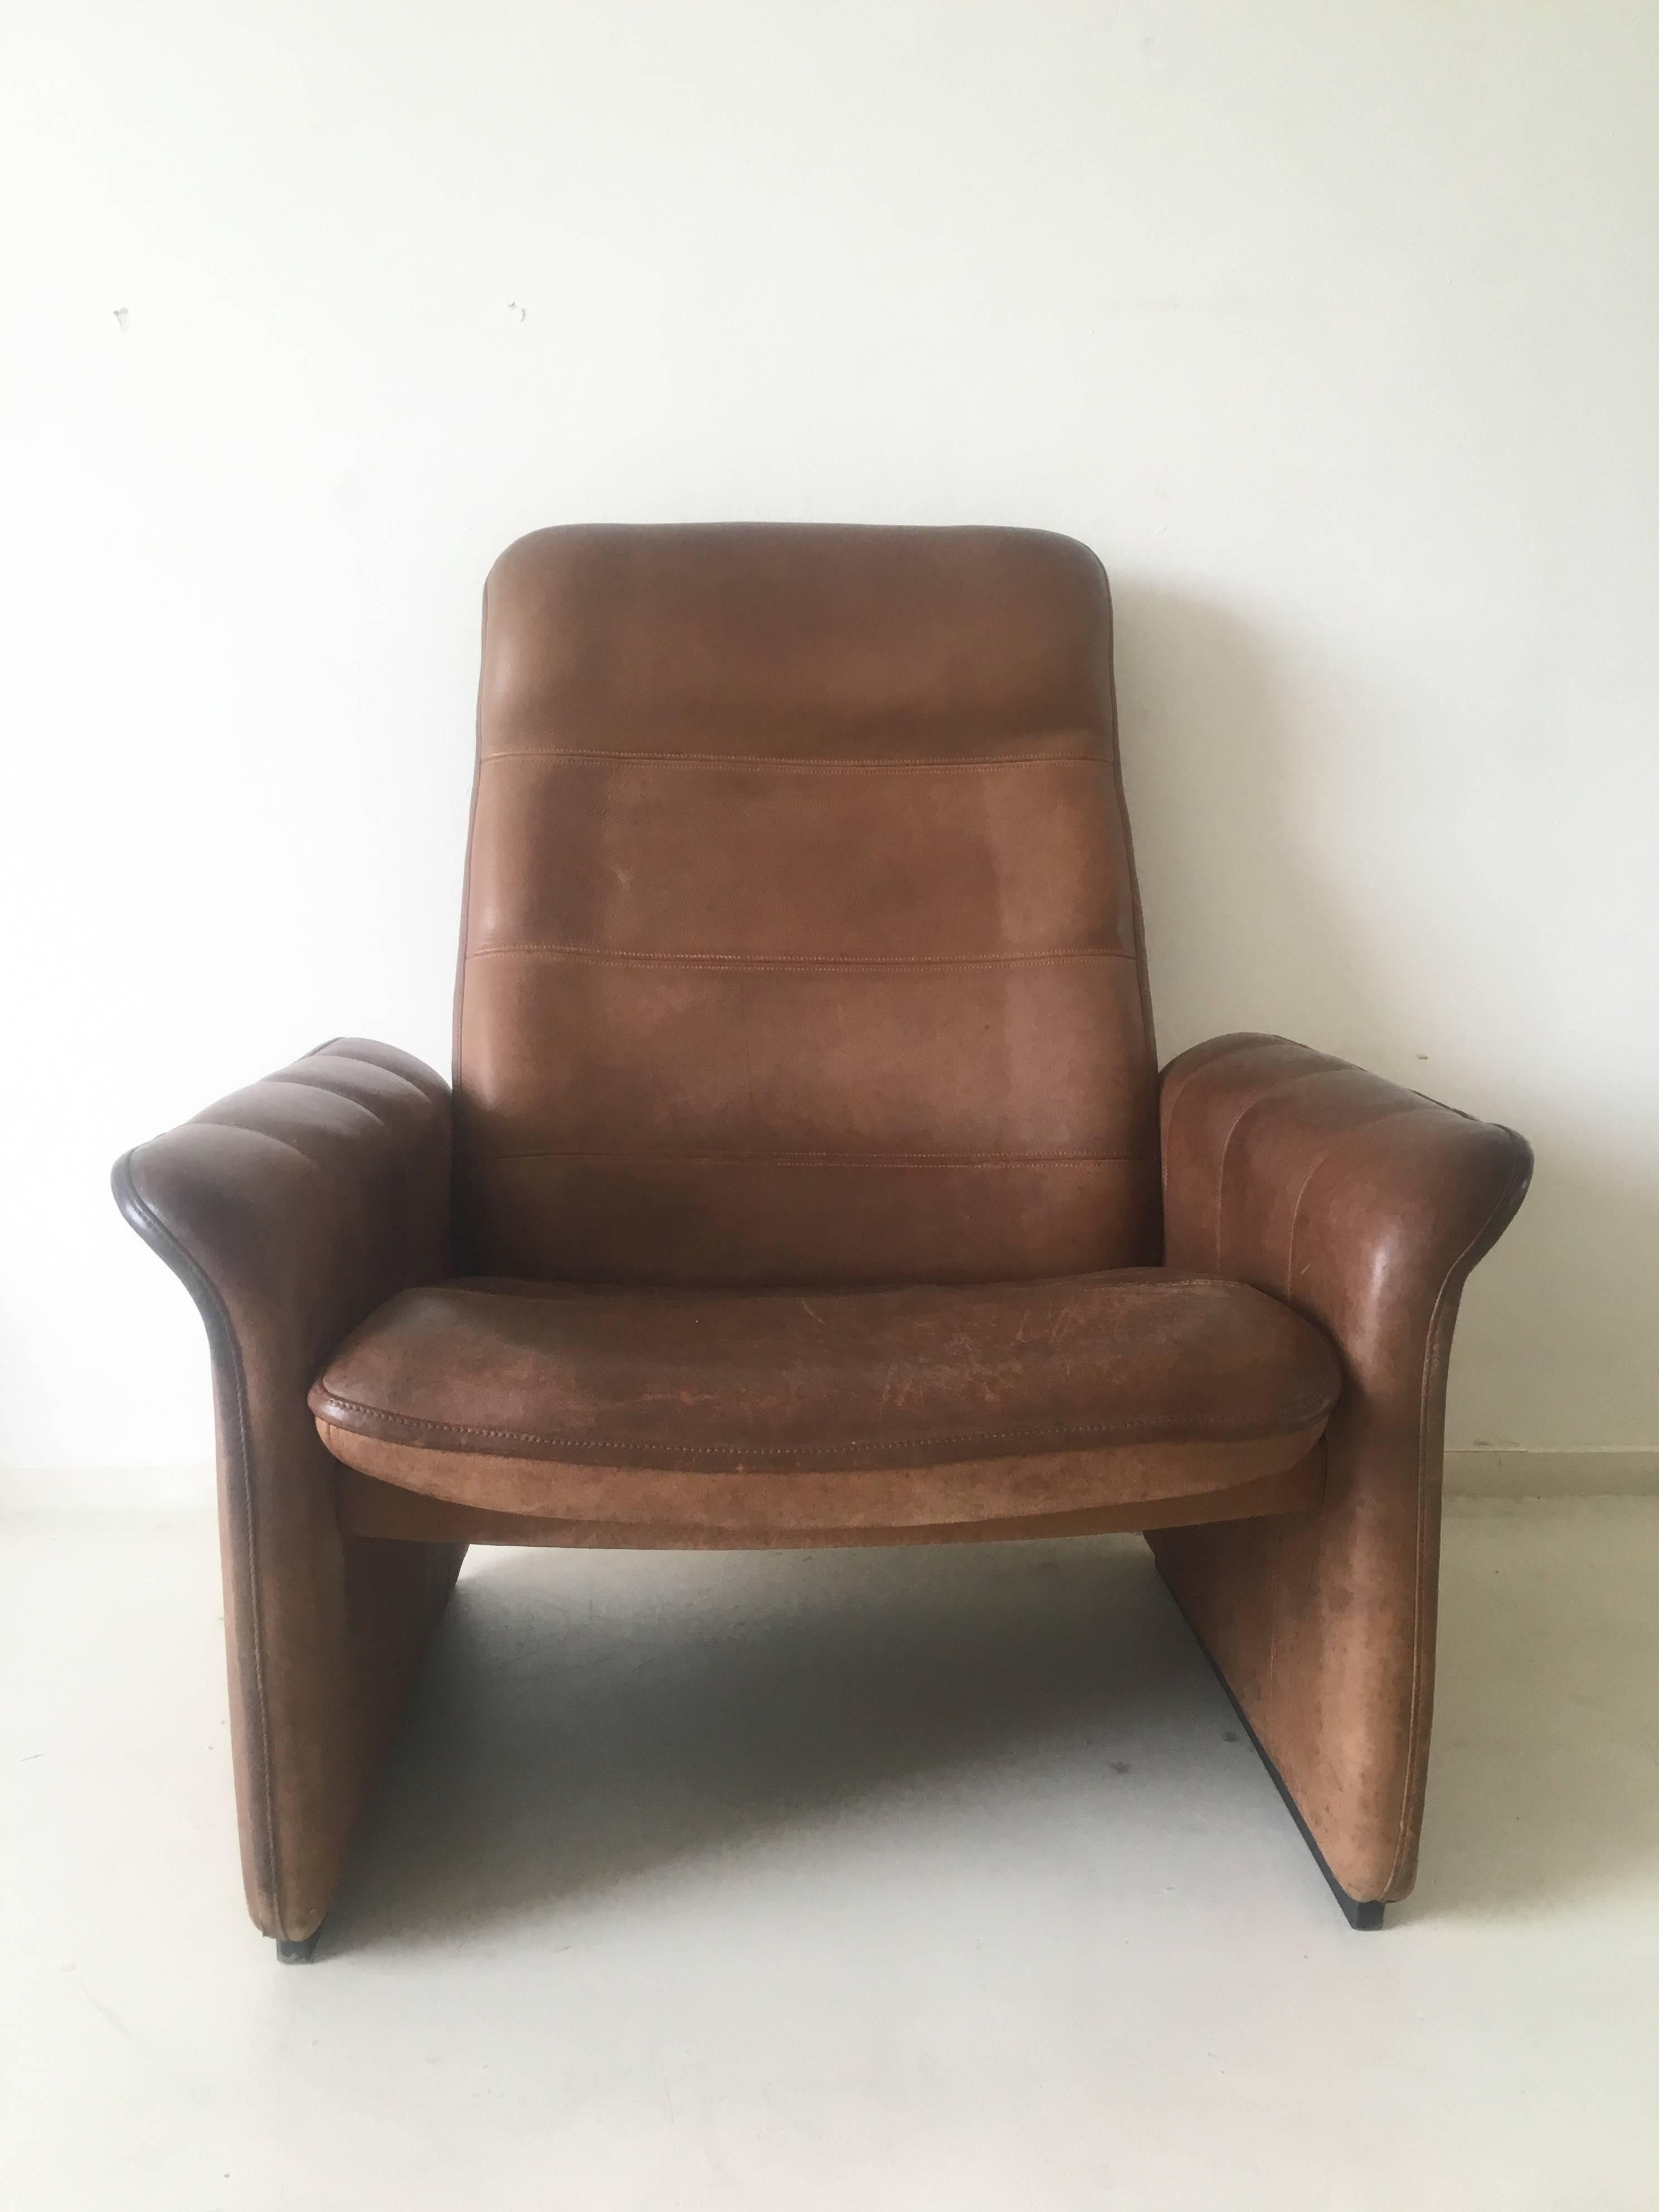 This wonderful lounge chair was designed and manufactured in Switzerland, circa the 1960s. It features a thick Buffalo leather body on a heavy base of wood. However the leather is good condition, it does show some signs of age and use. No rips or